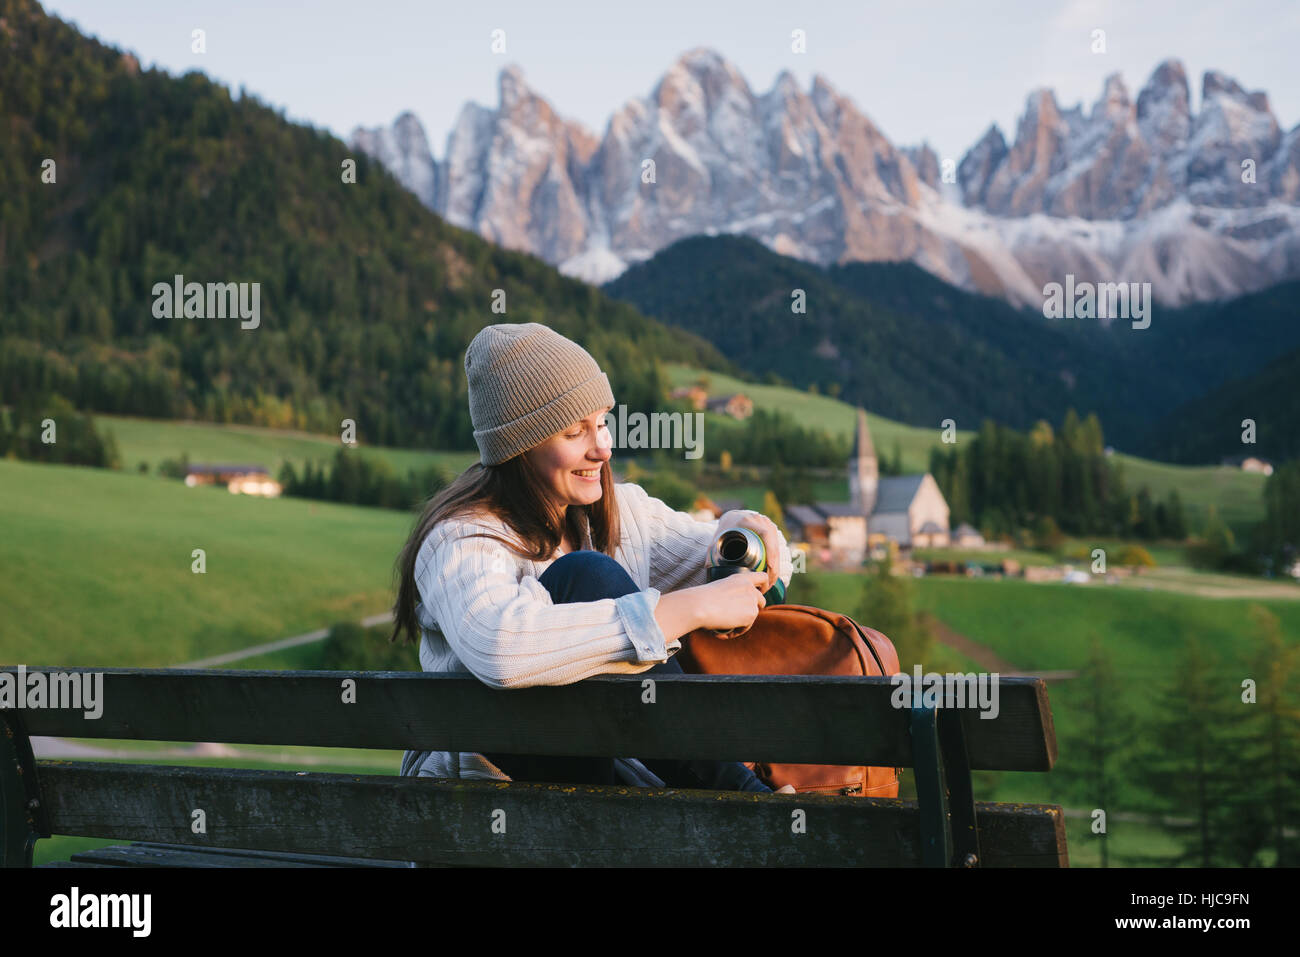 Woman relaxing on park bench, Santa Maddalena, Dolomite Alps, Val di Funes (Funes Valley), South Tyrol, Italy Stock Photo